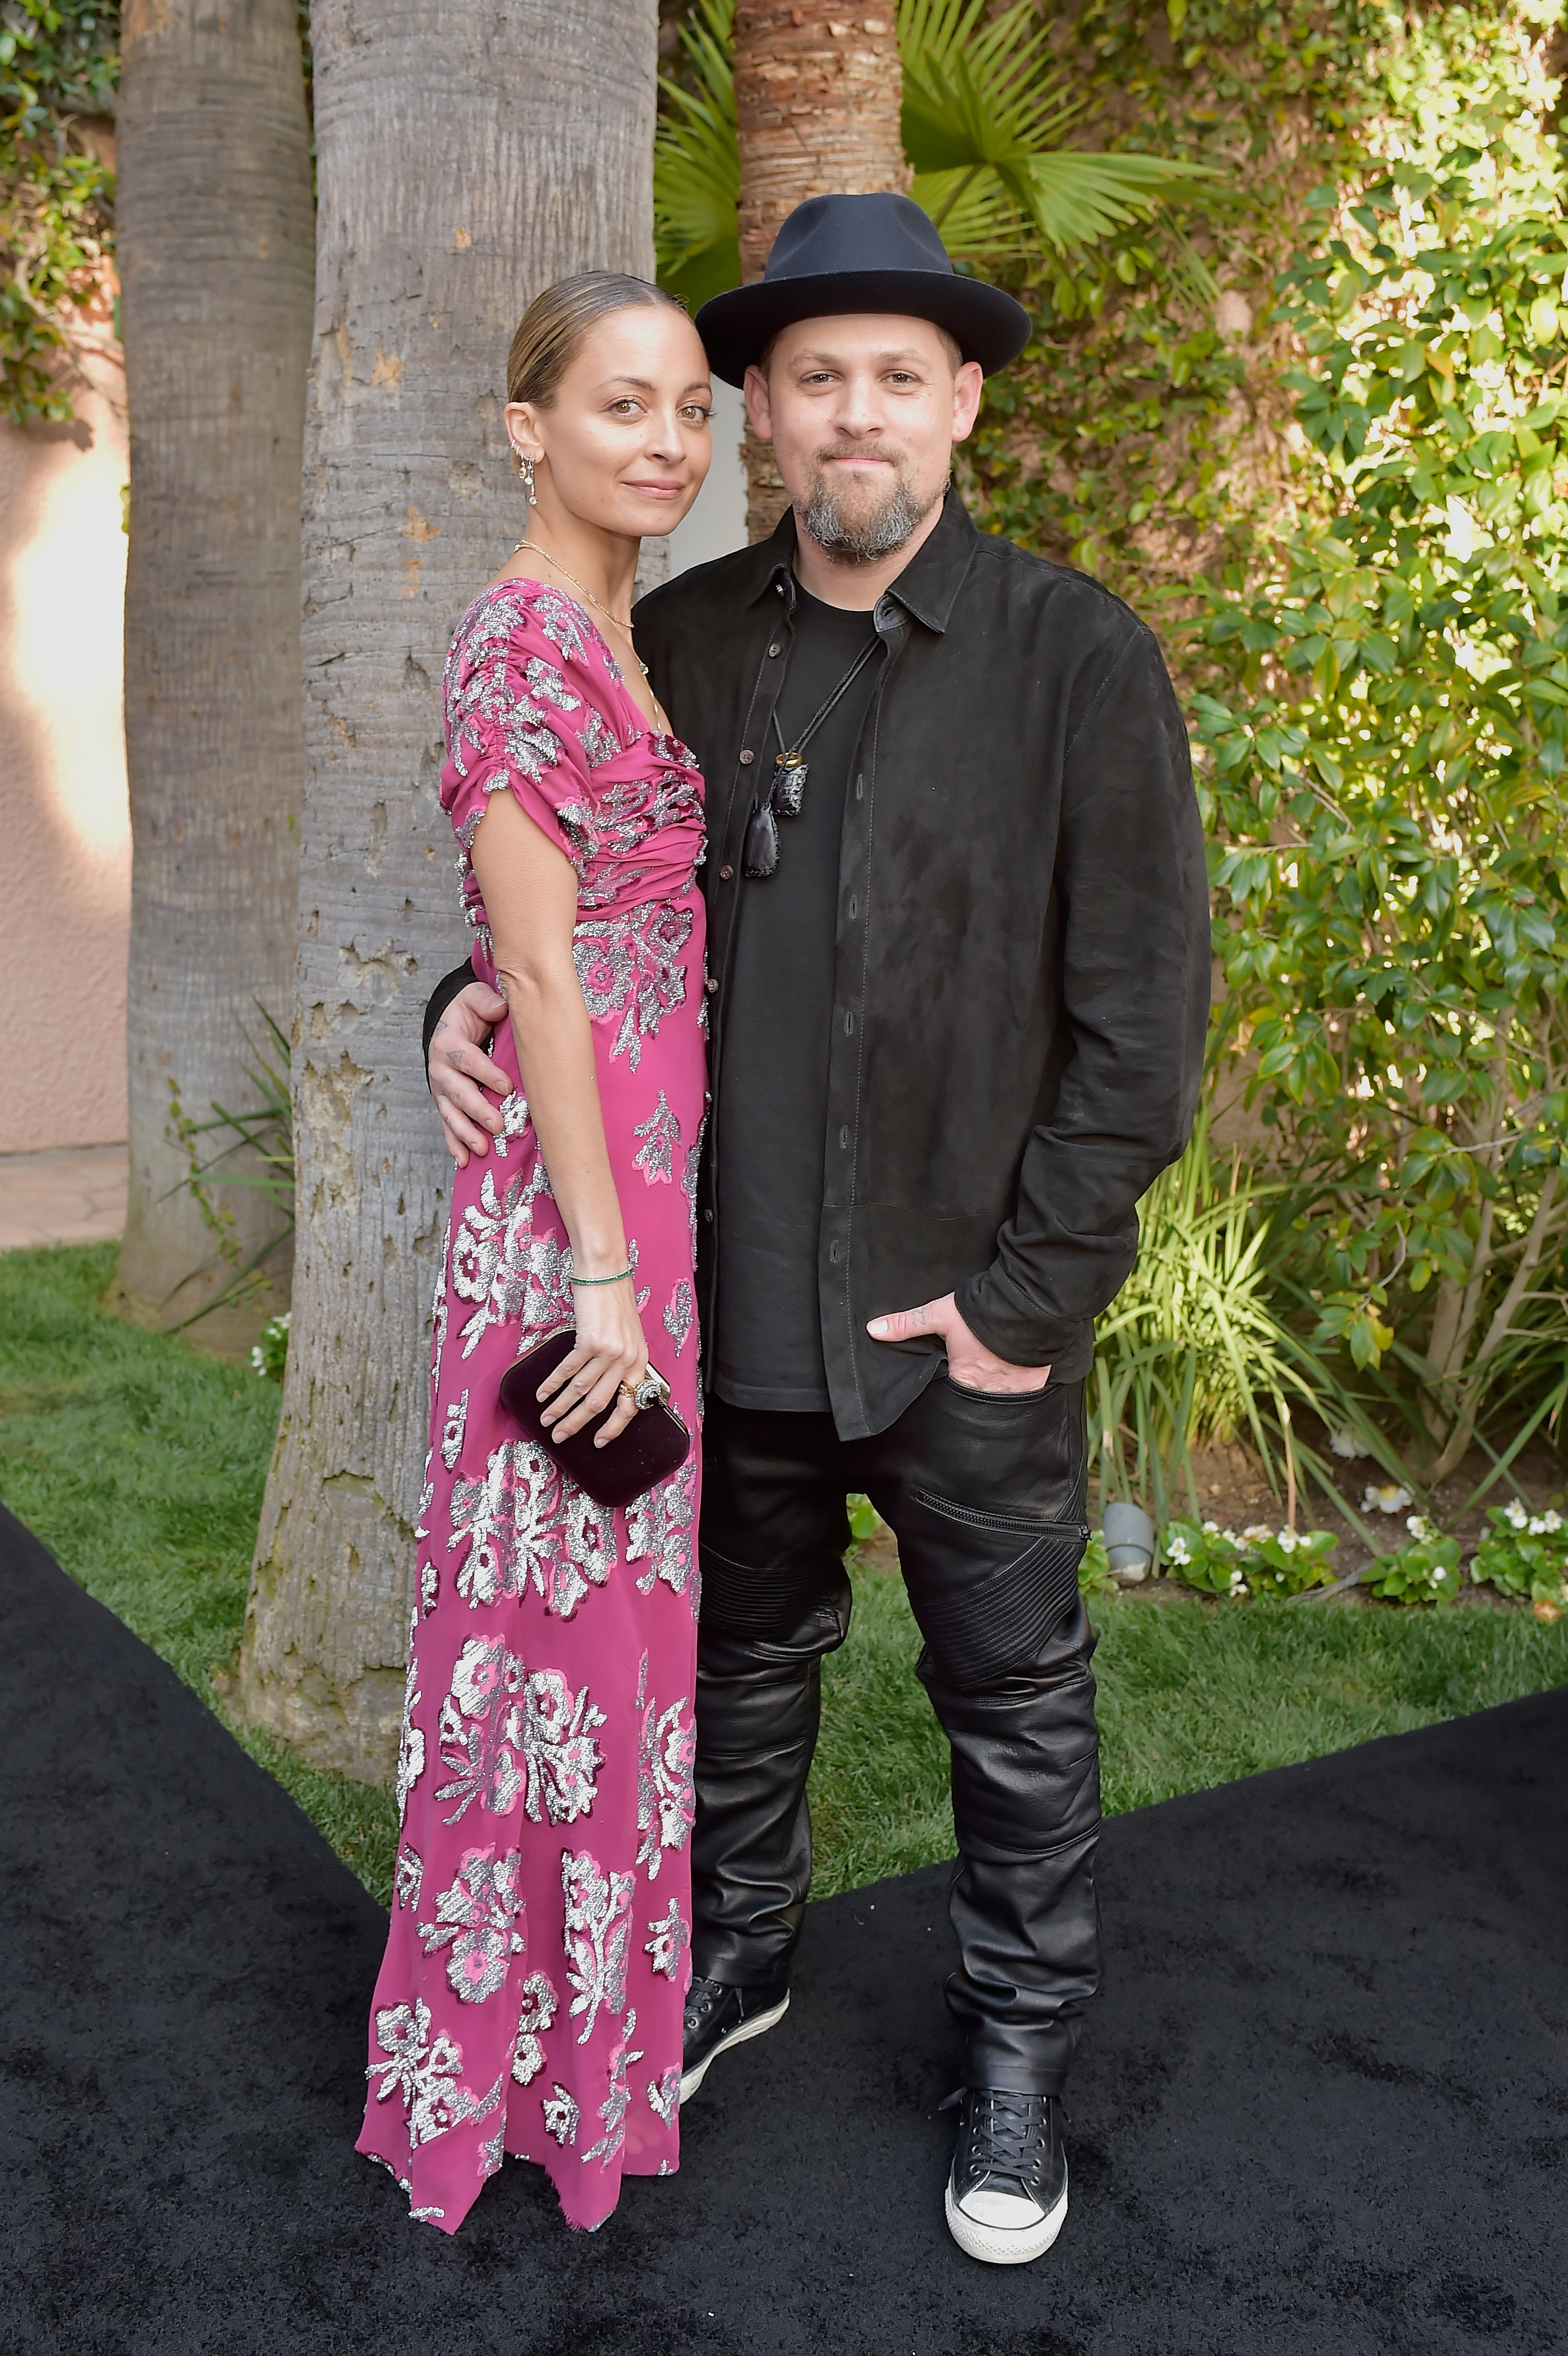 Nicole Richie and Joel Madden attend The Daily Front Row's 4th Annual Fashion Los Angeles Awards at Beverly Hills Hotel on April 8, 2018 in Beverly Hills, California. | Source: Getty Images